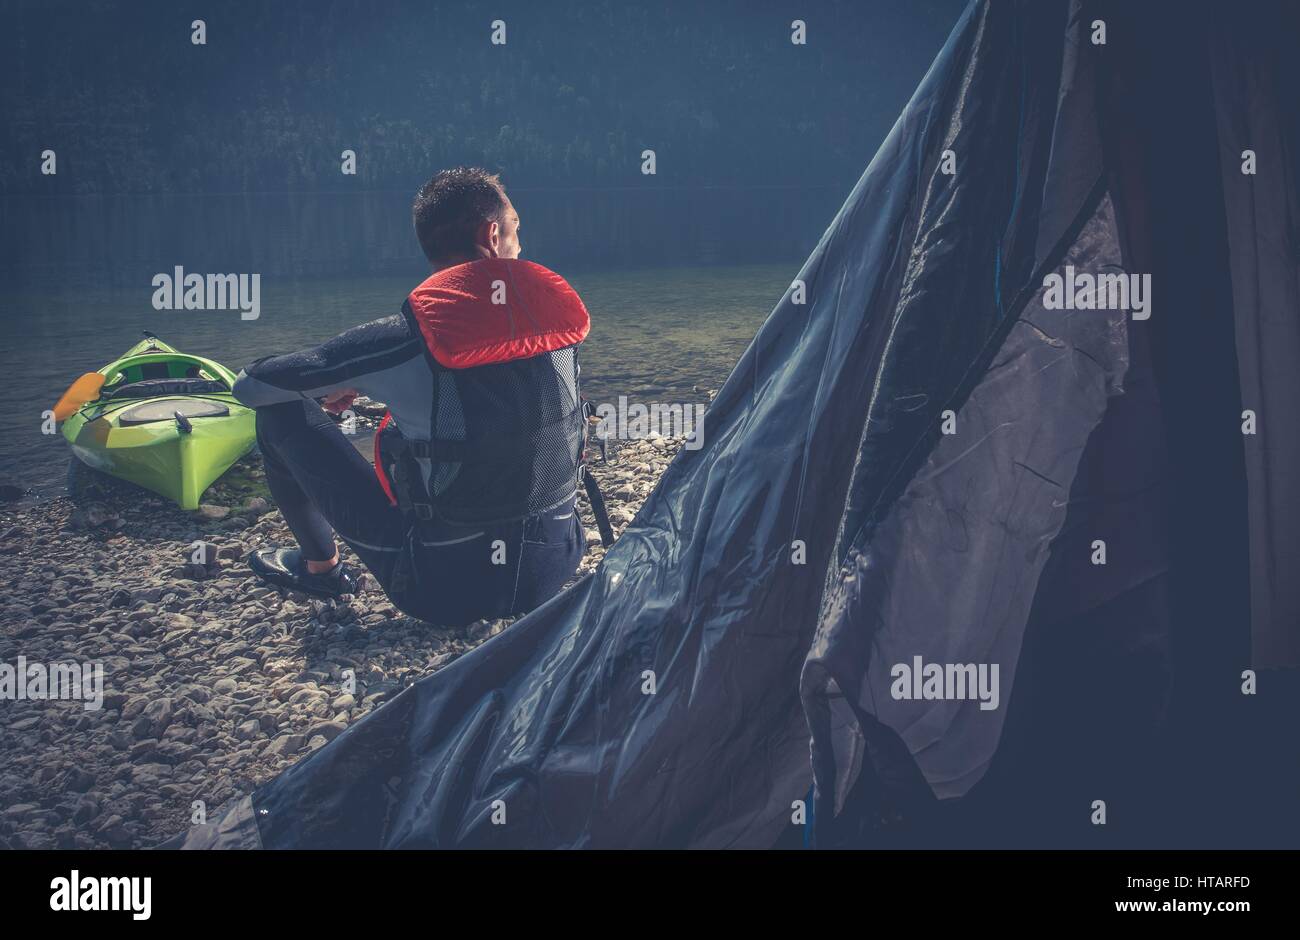 Outdoor Sportsman Camping. Caucasian Men in Wetsuit on the Camping on the Edge of Scenic Lake. Stock Photo